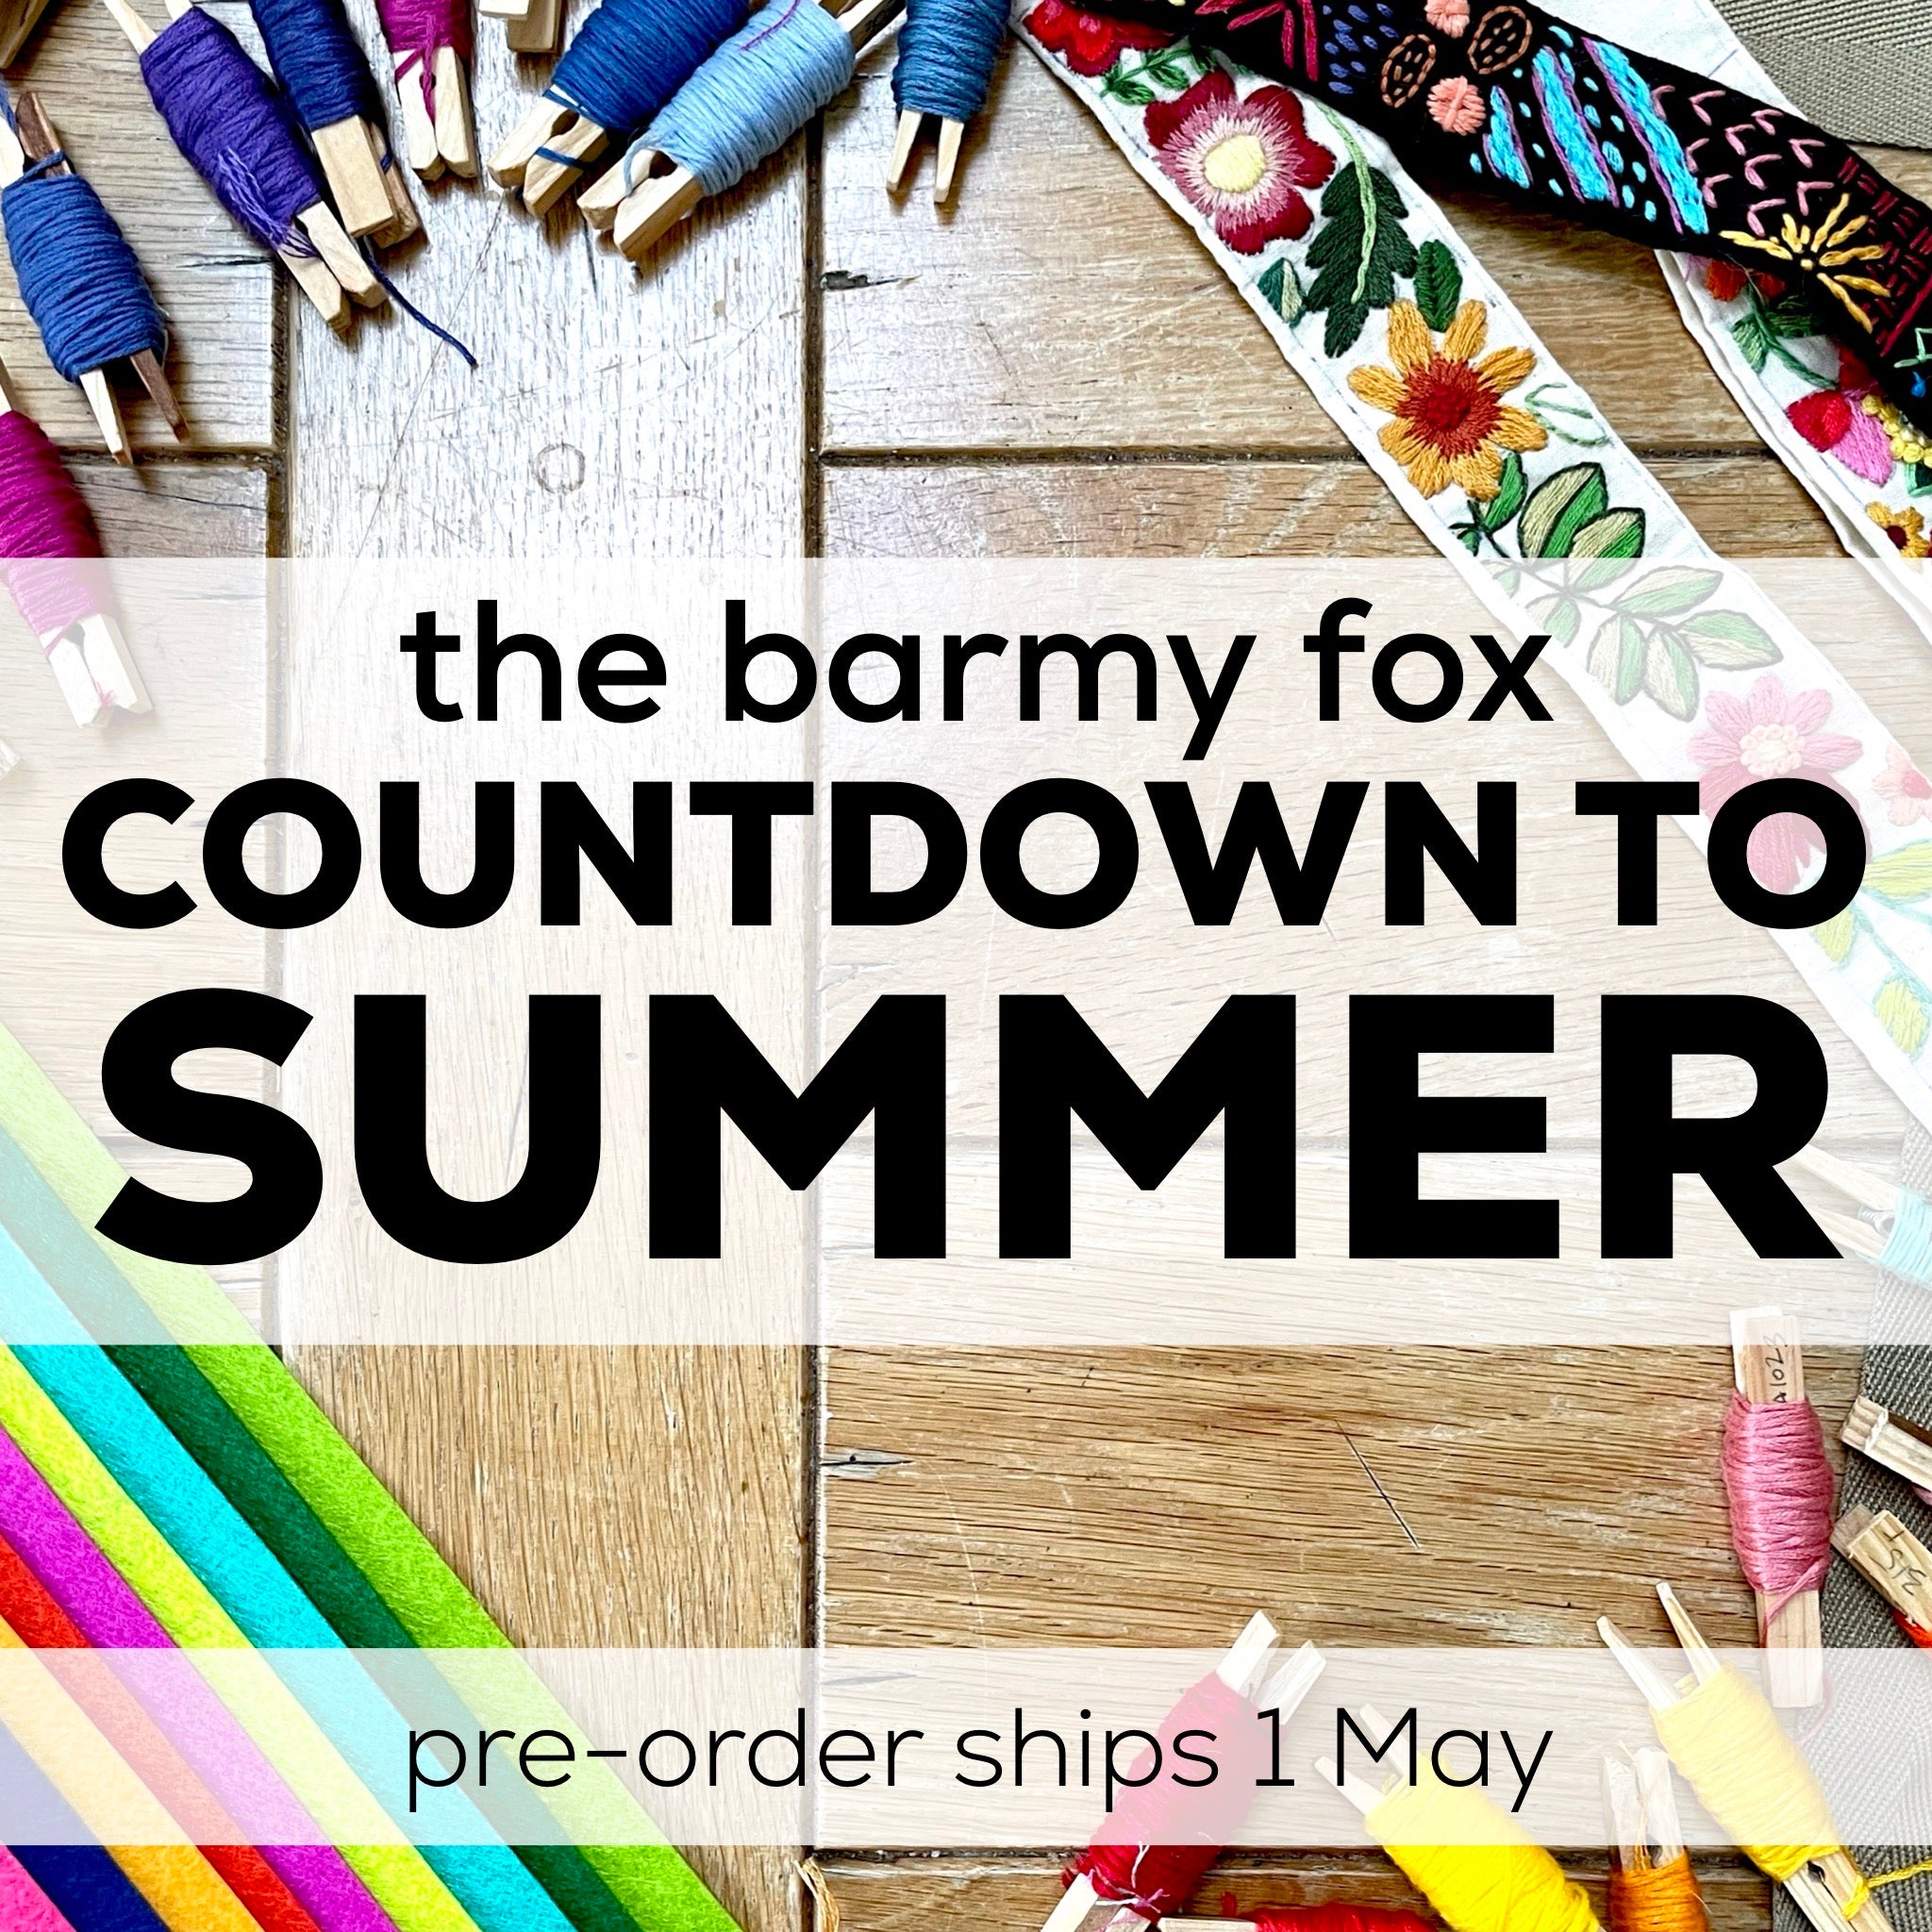 Countdown to Summer - The Barmy Fox Summer Embroidery Box